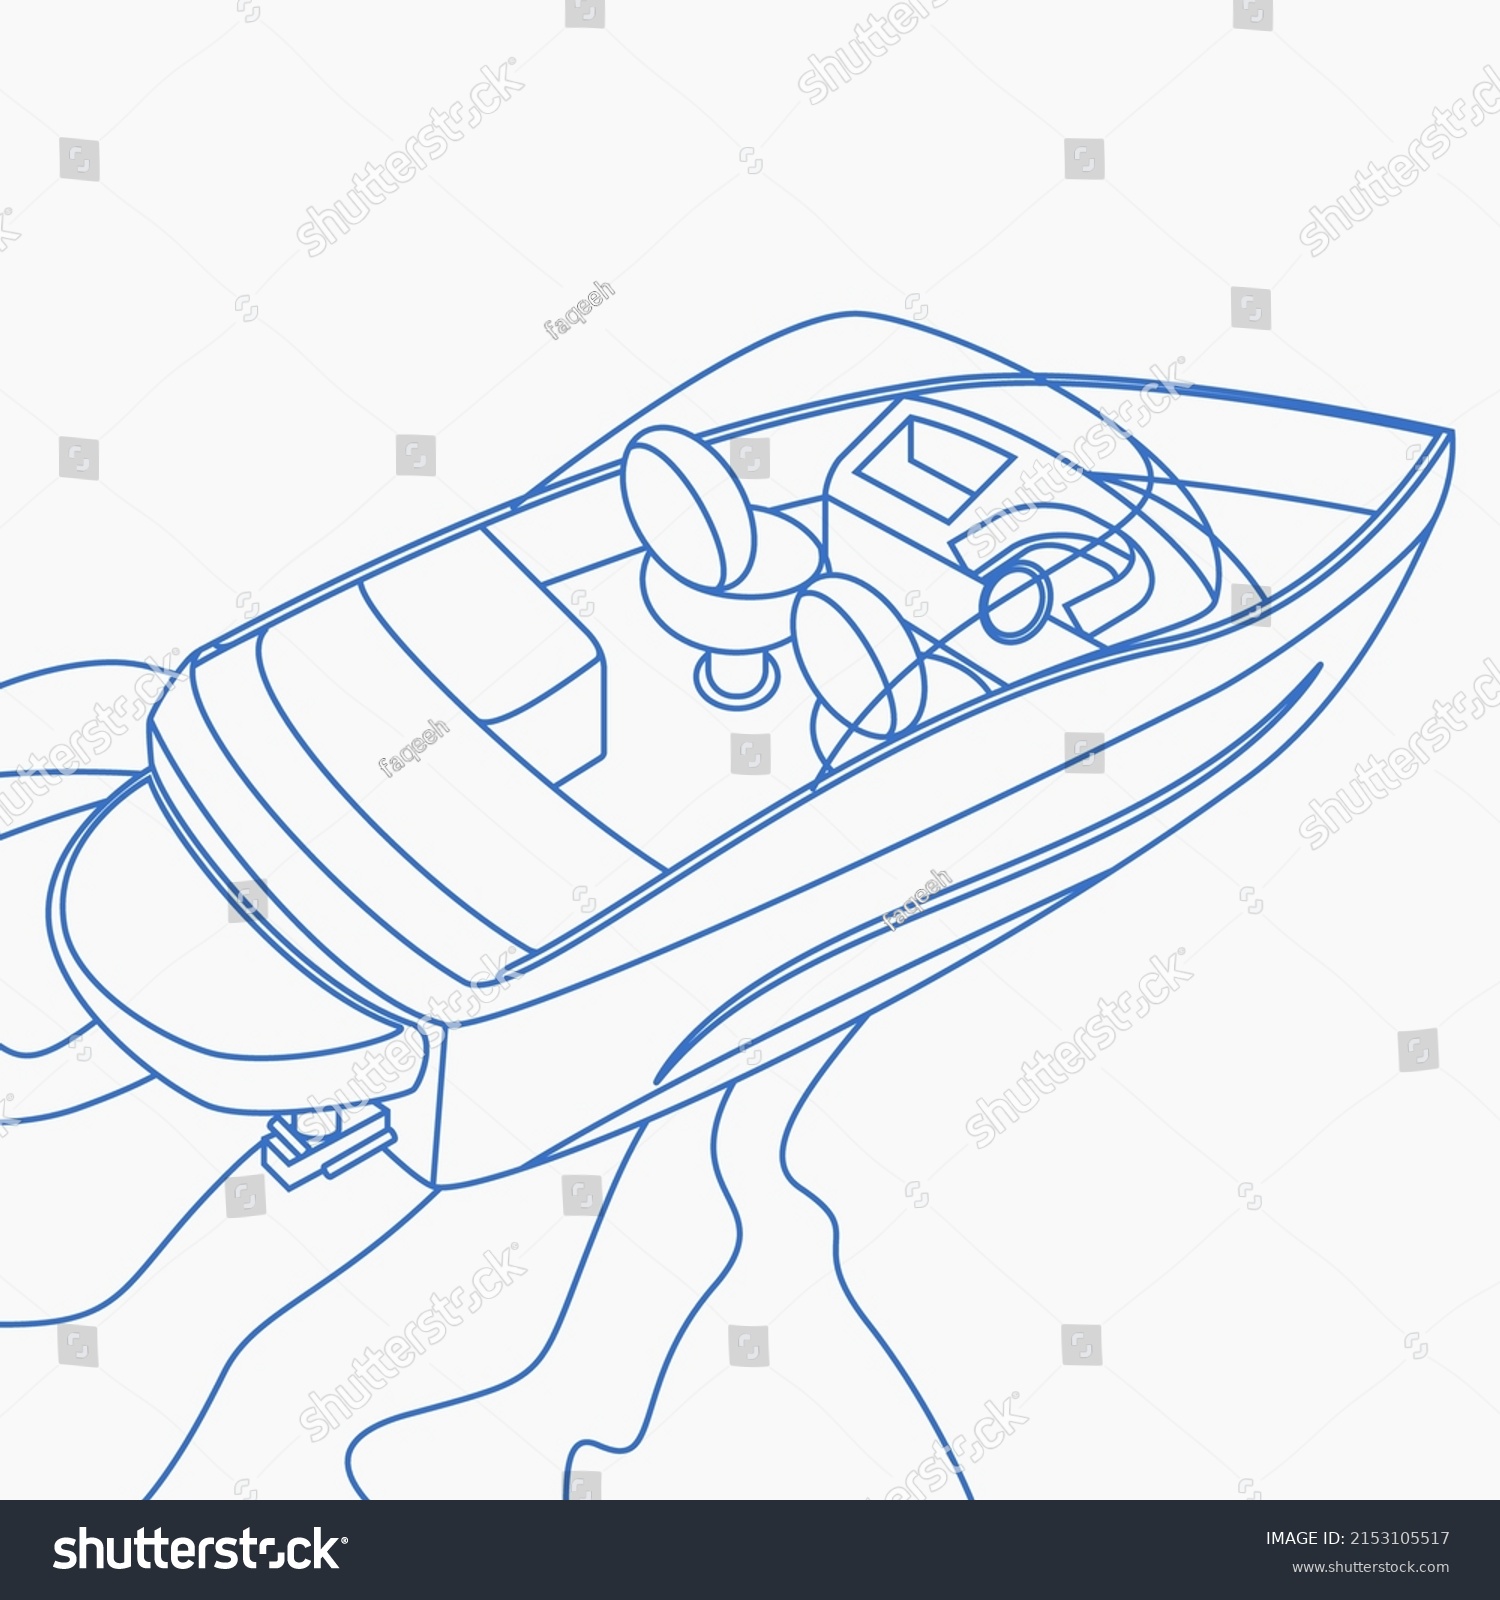 SVG of Editable Top Back Oblique View American Bowrider Boat on Water Vector Illustration in Outline Style for Artwork Element of Transportation or Recreation Related Design svg